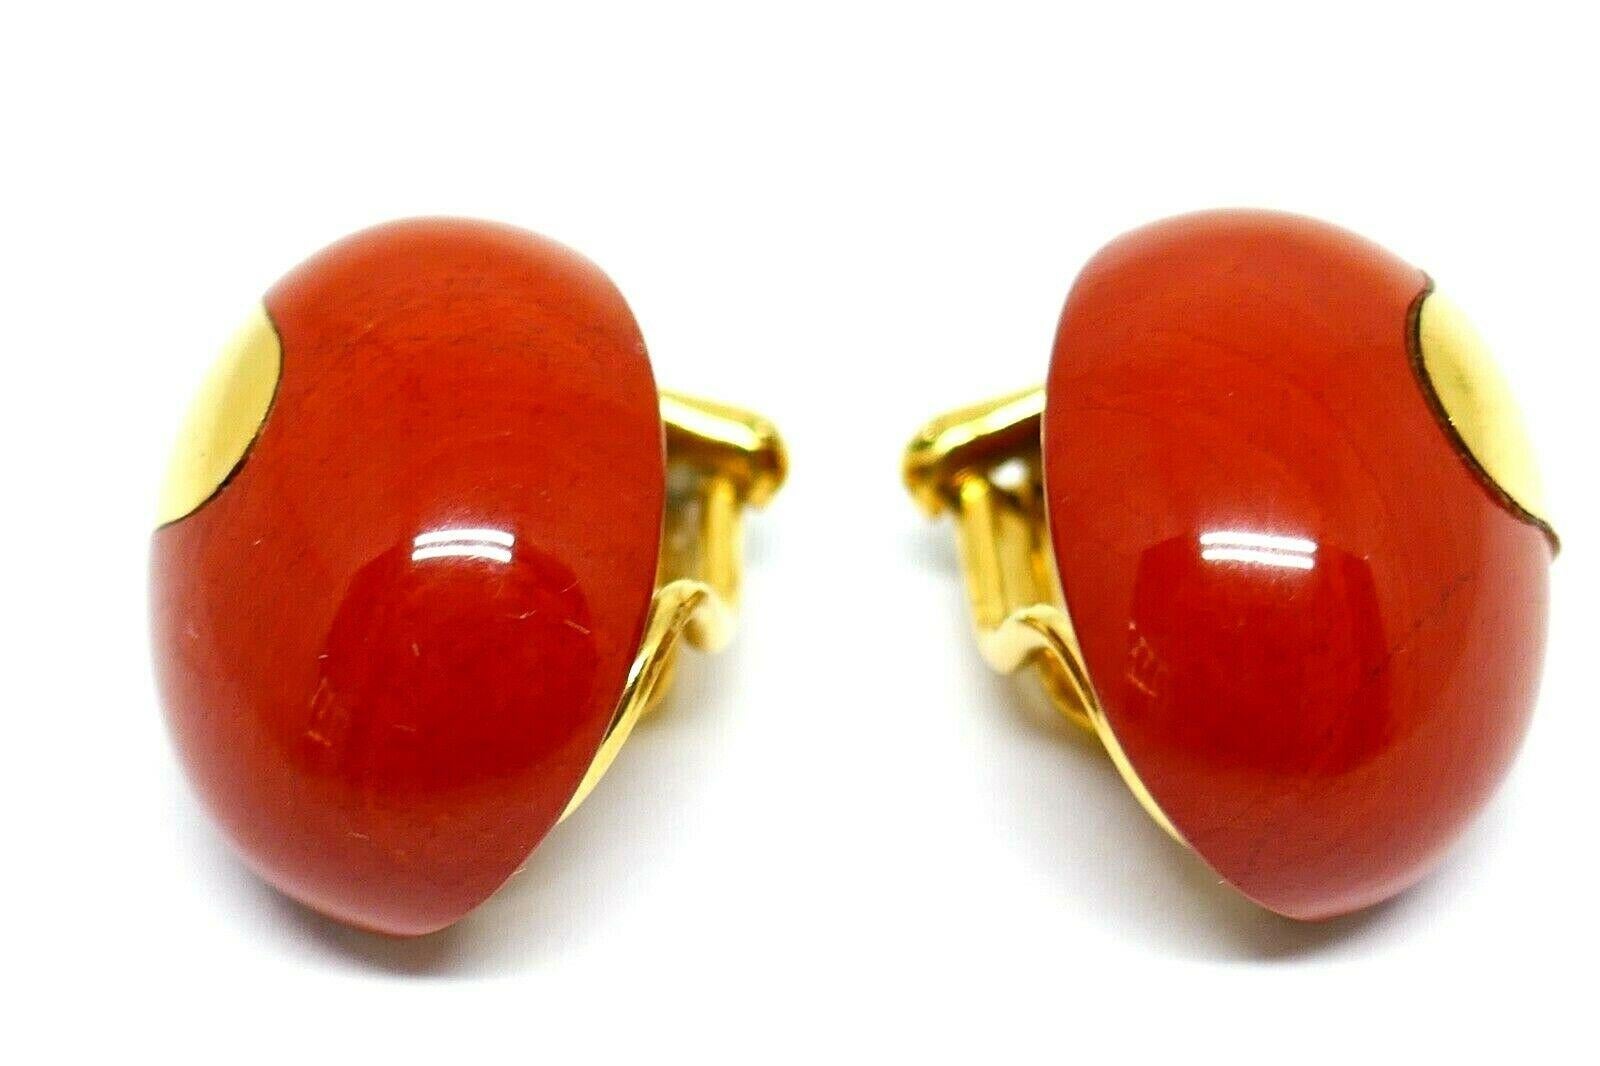 Vintage Tiffany&Co oval shape carnelian and 14k yellow gold clip-on earrings.
Stamped with the Tiffany&Co maker's mark. 
Measurements: 7/8